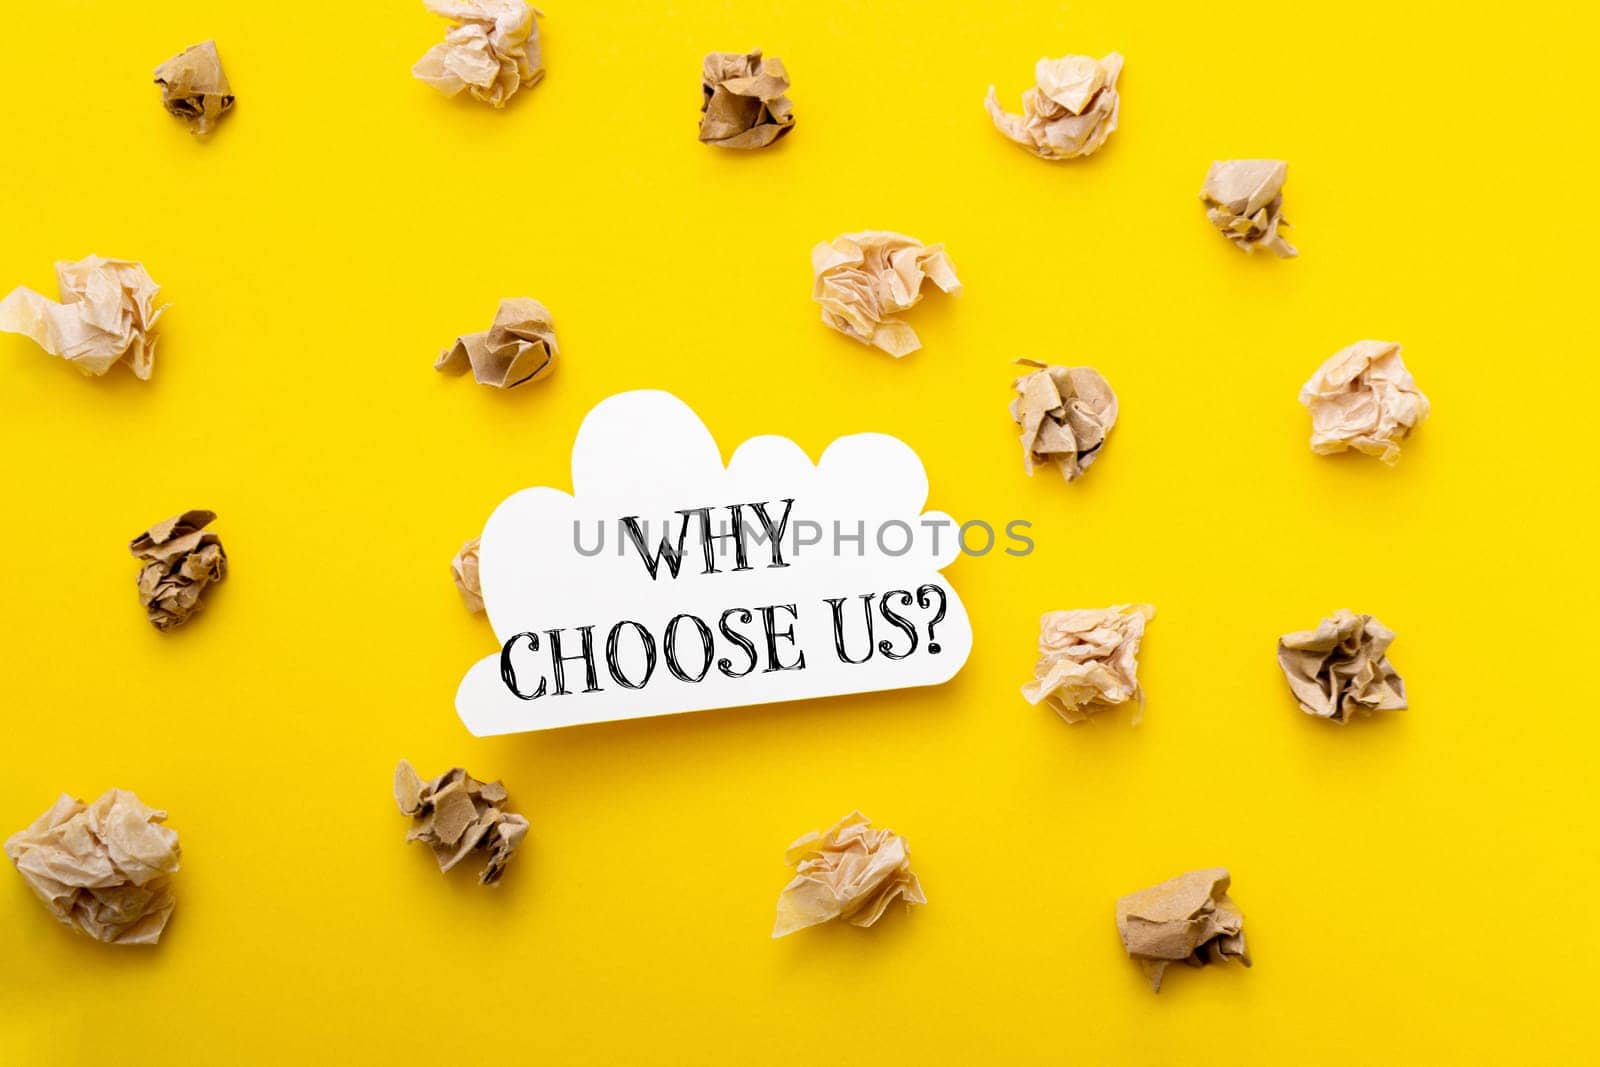 A yellow background with a white sign that says Why choose us on it. The sign is surrounded by shredded paper, giving the impression of a messy or disorganized environment